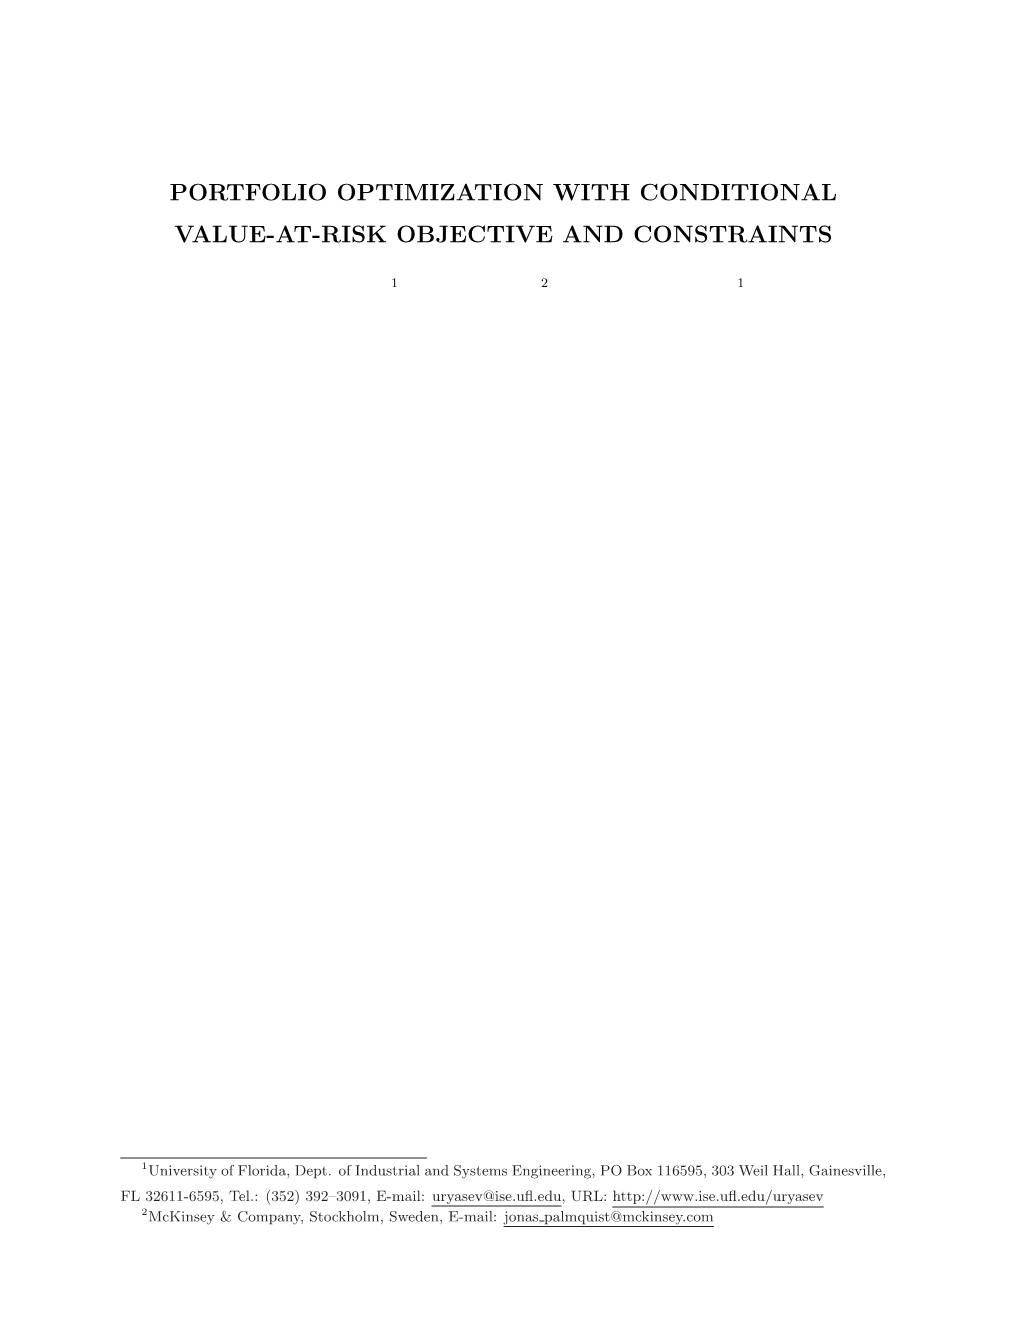 Portfolio Optimization with Conditional Value-At-Risk Objective and Constraints